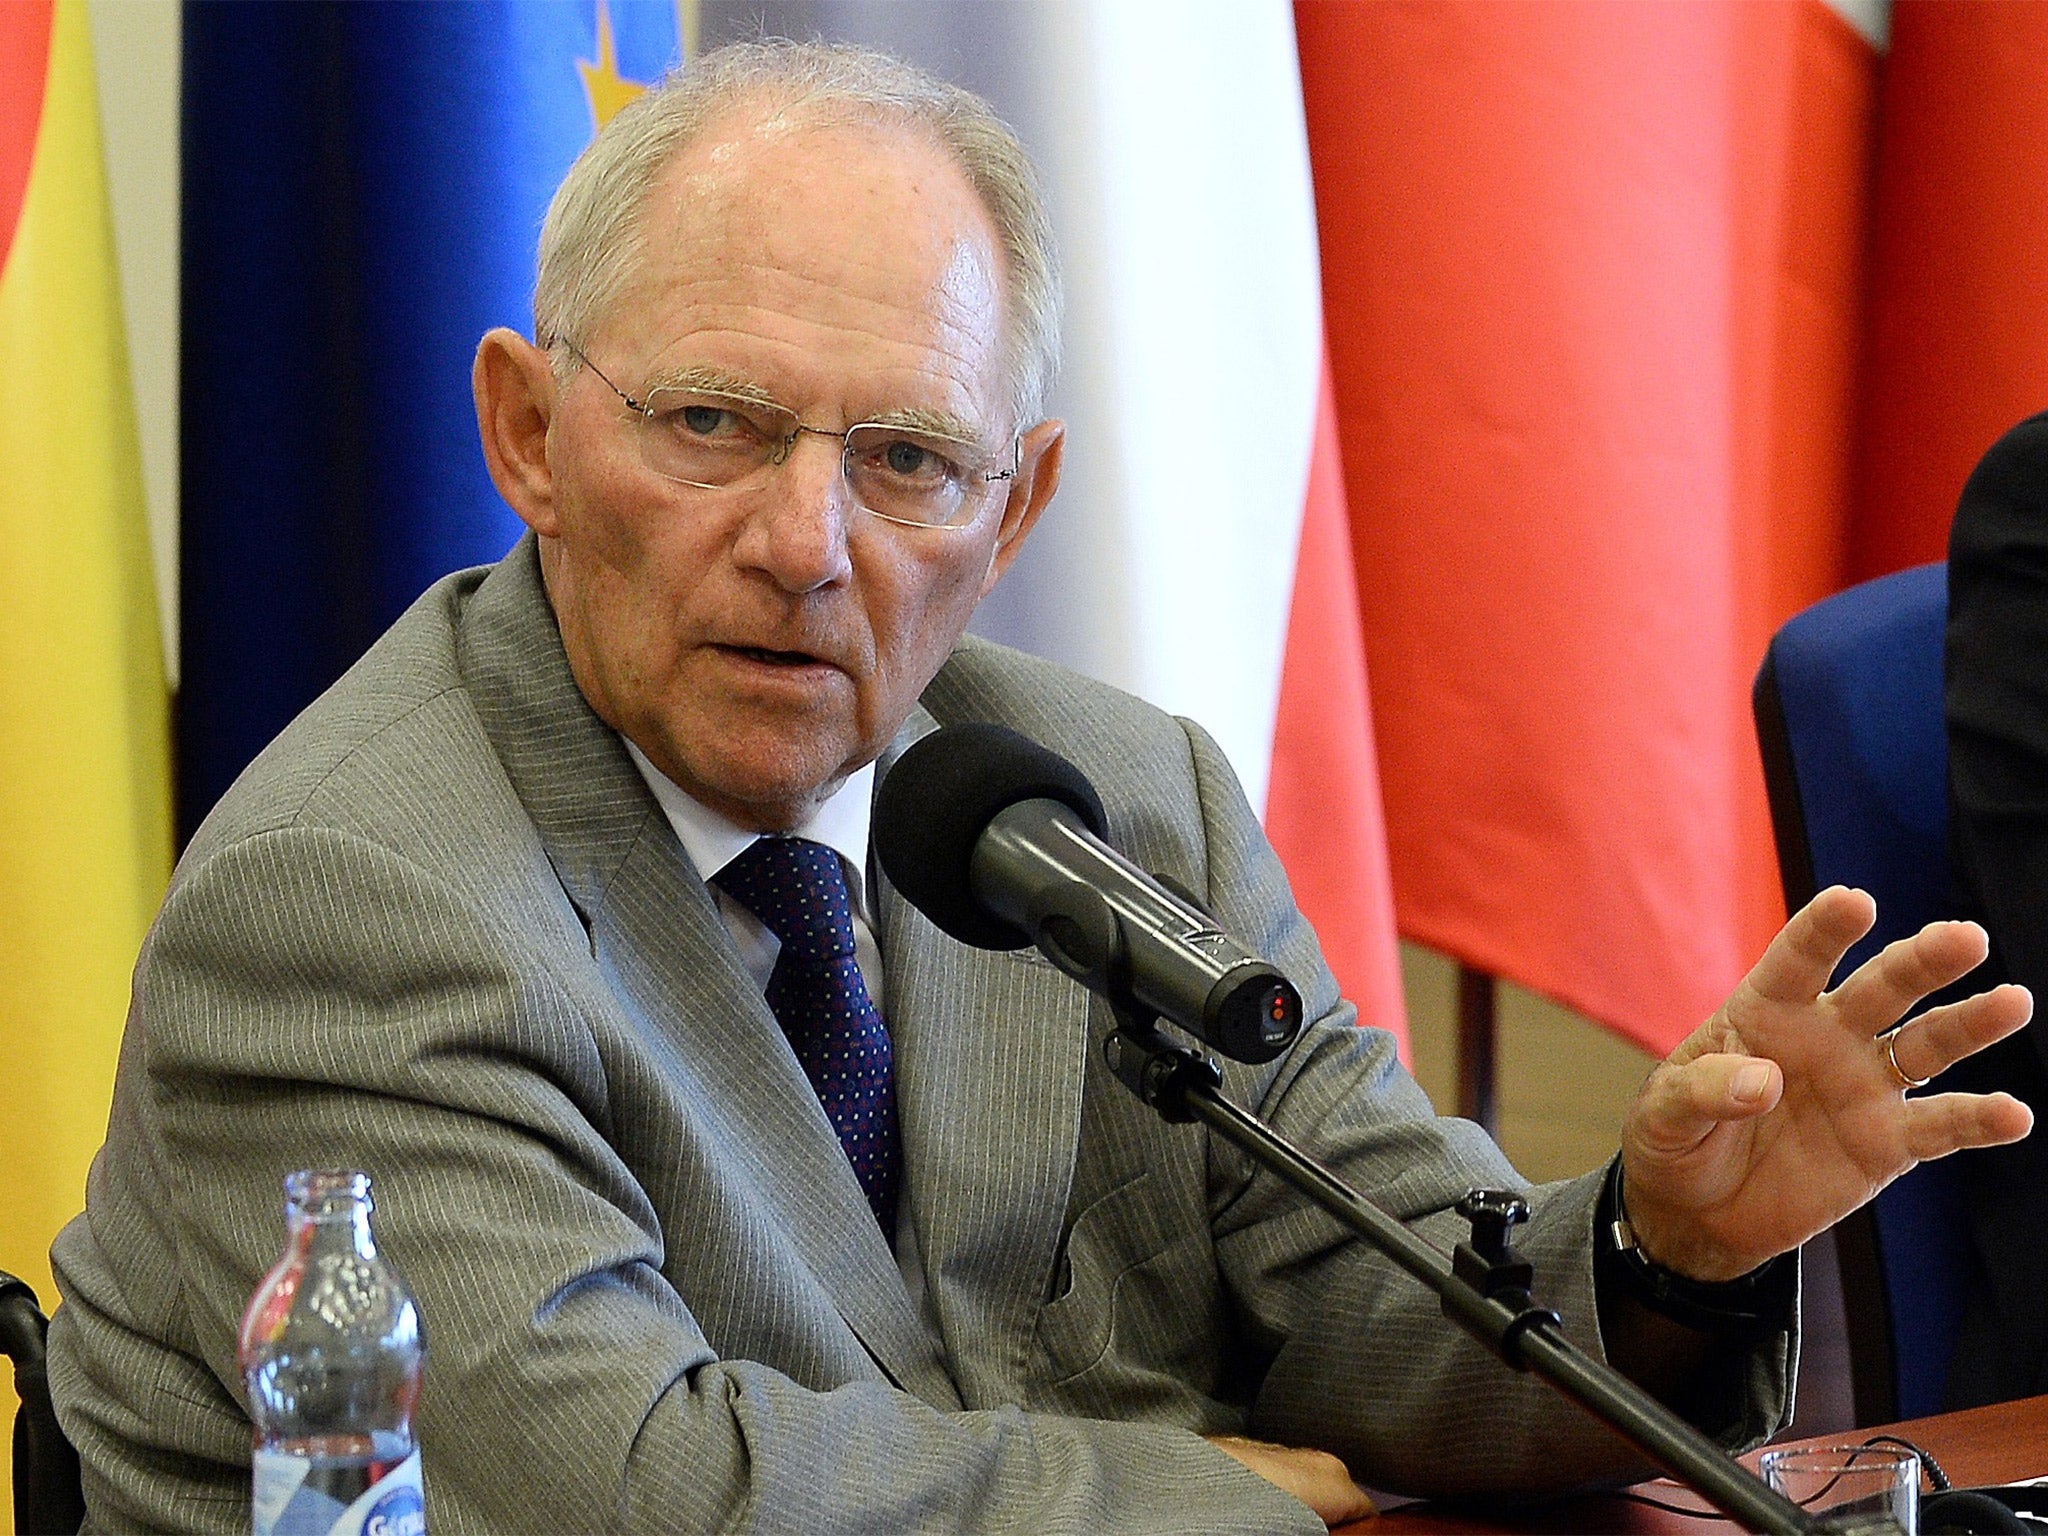 Wolfgang Schaeuble, German finance minister, was asked what he would do during a panel discussion